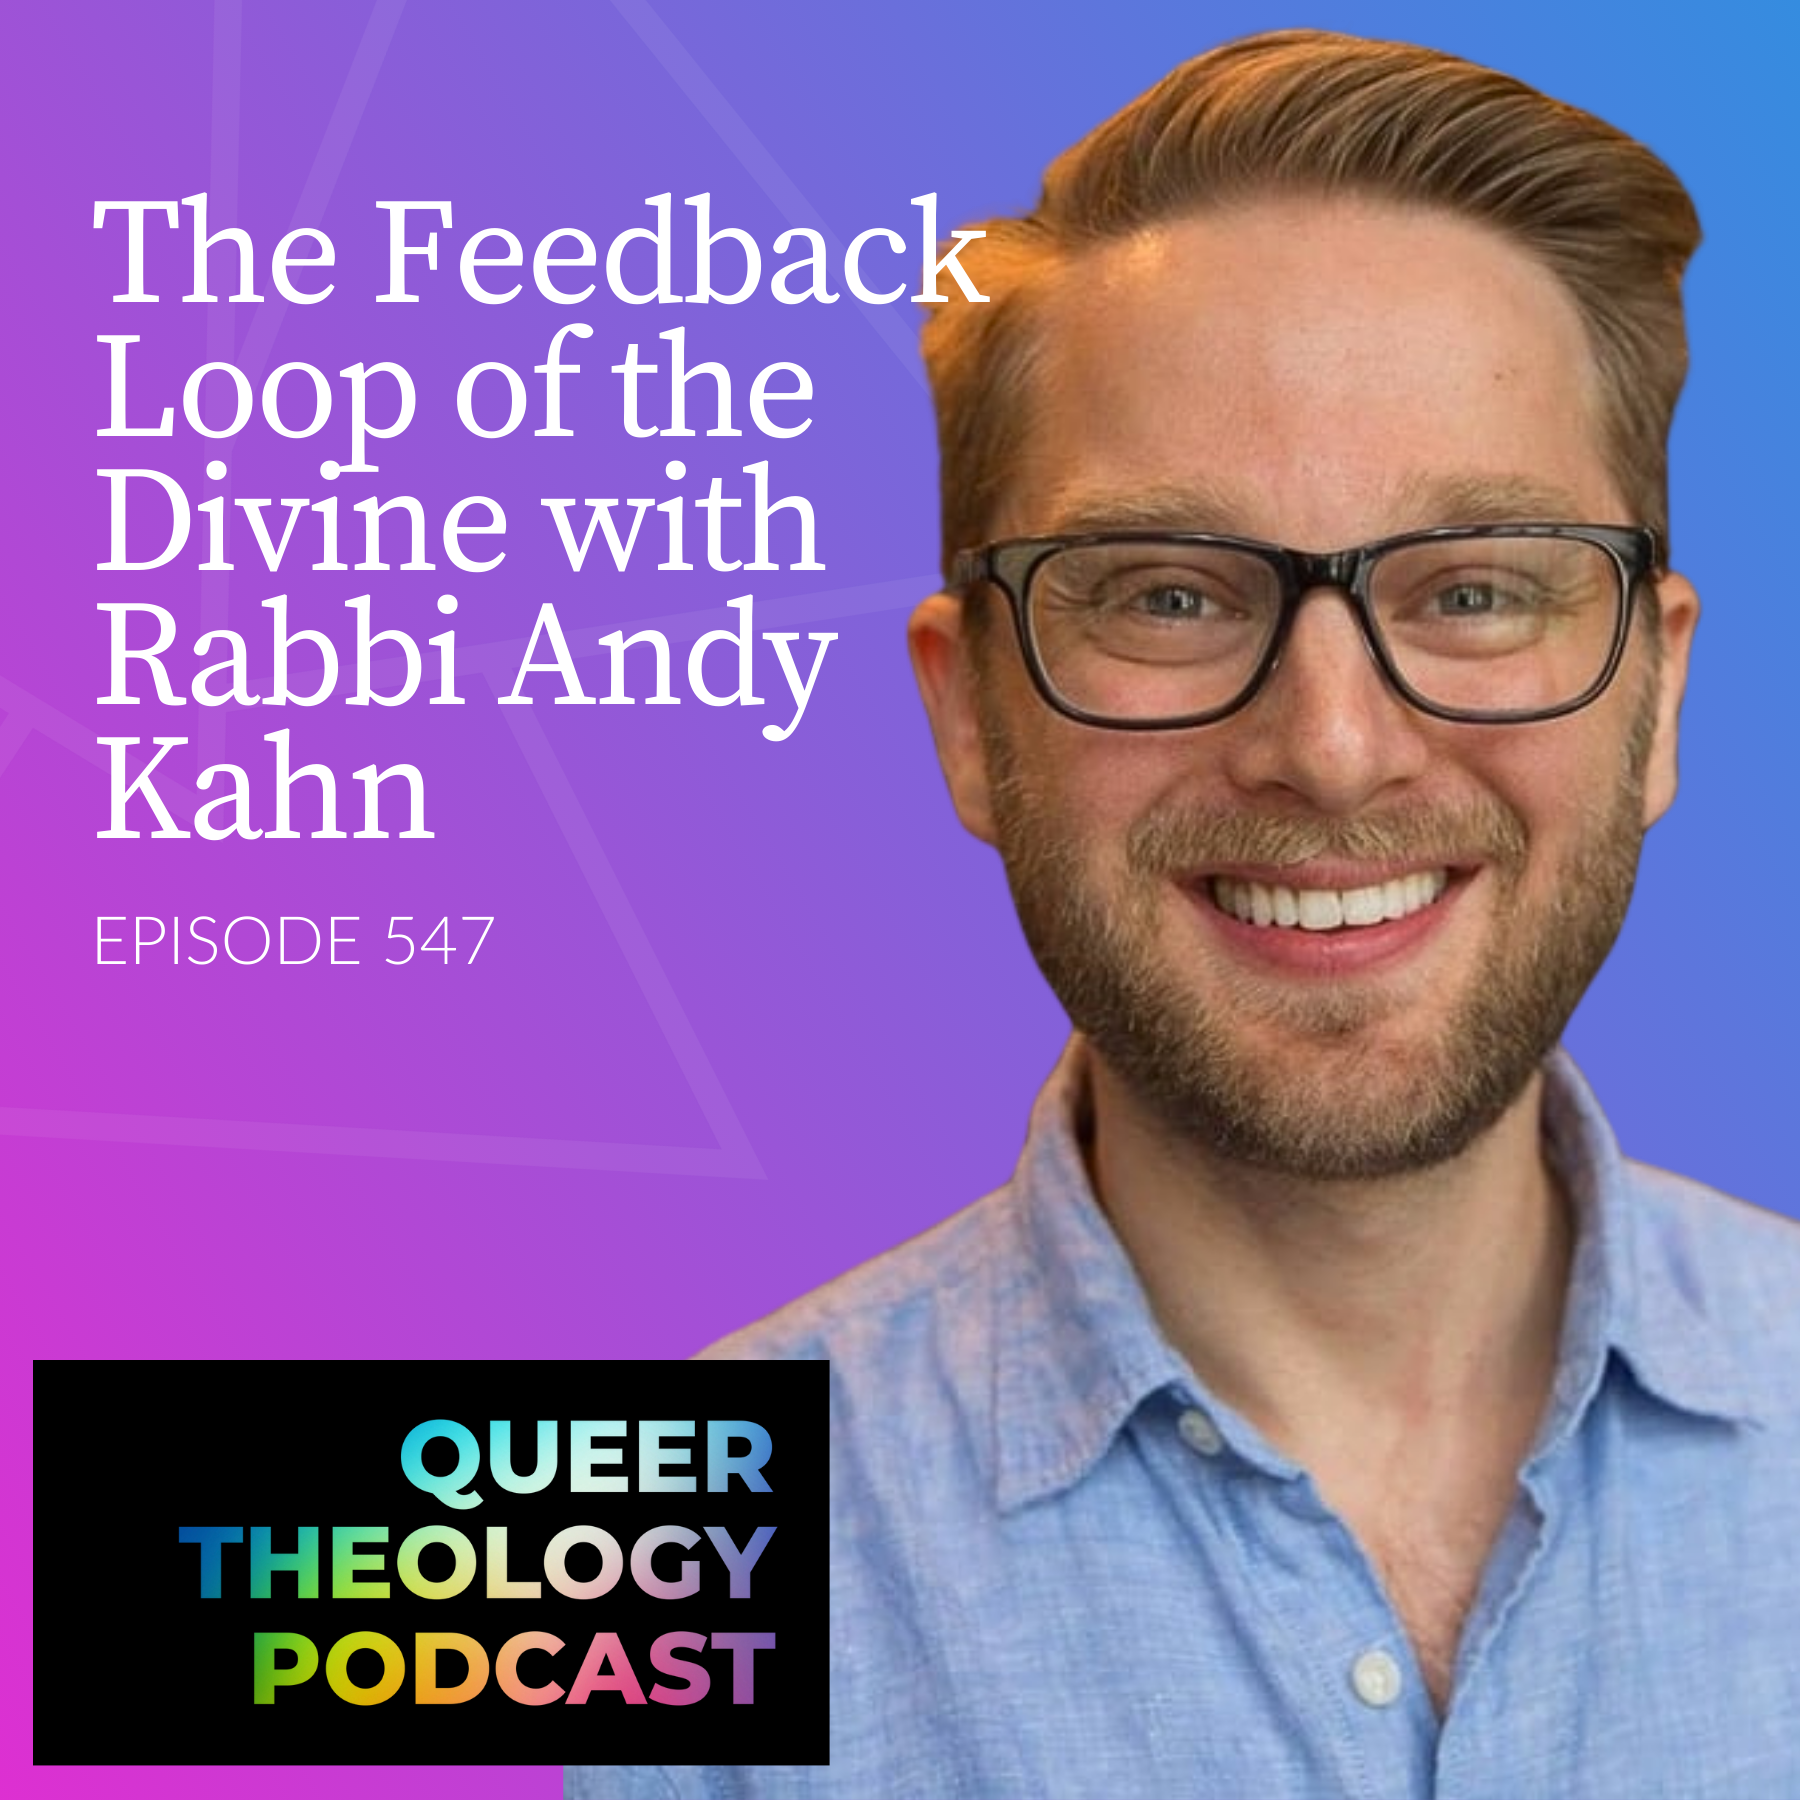 The Feedback Loop of the Divine with Rabbi Andy Kahn